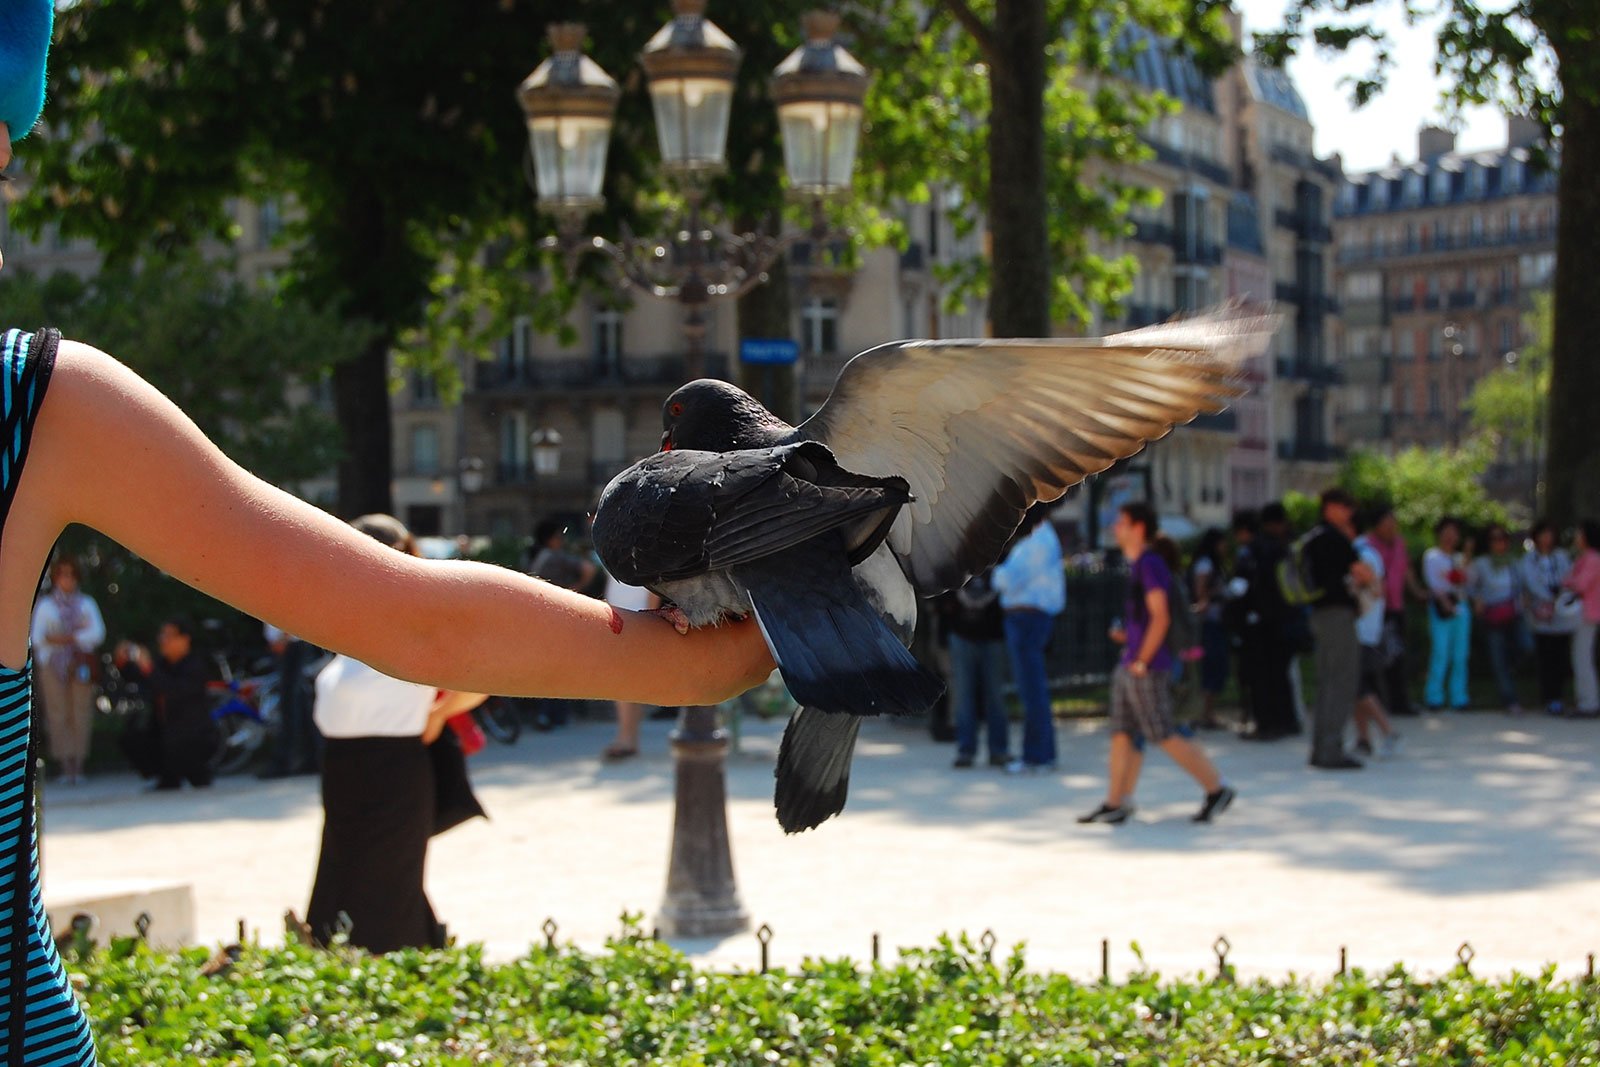 How to feed the pigeons in Paris